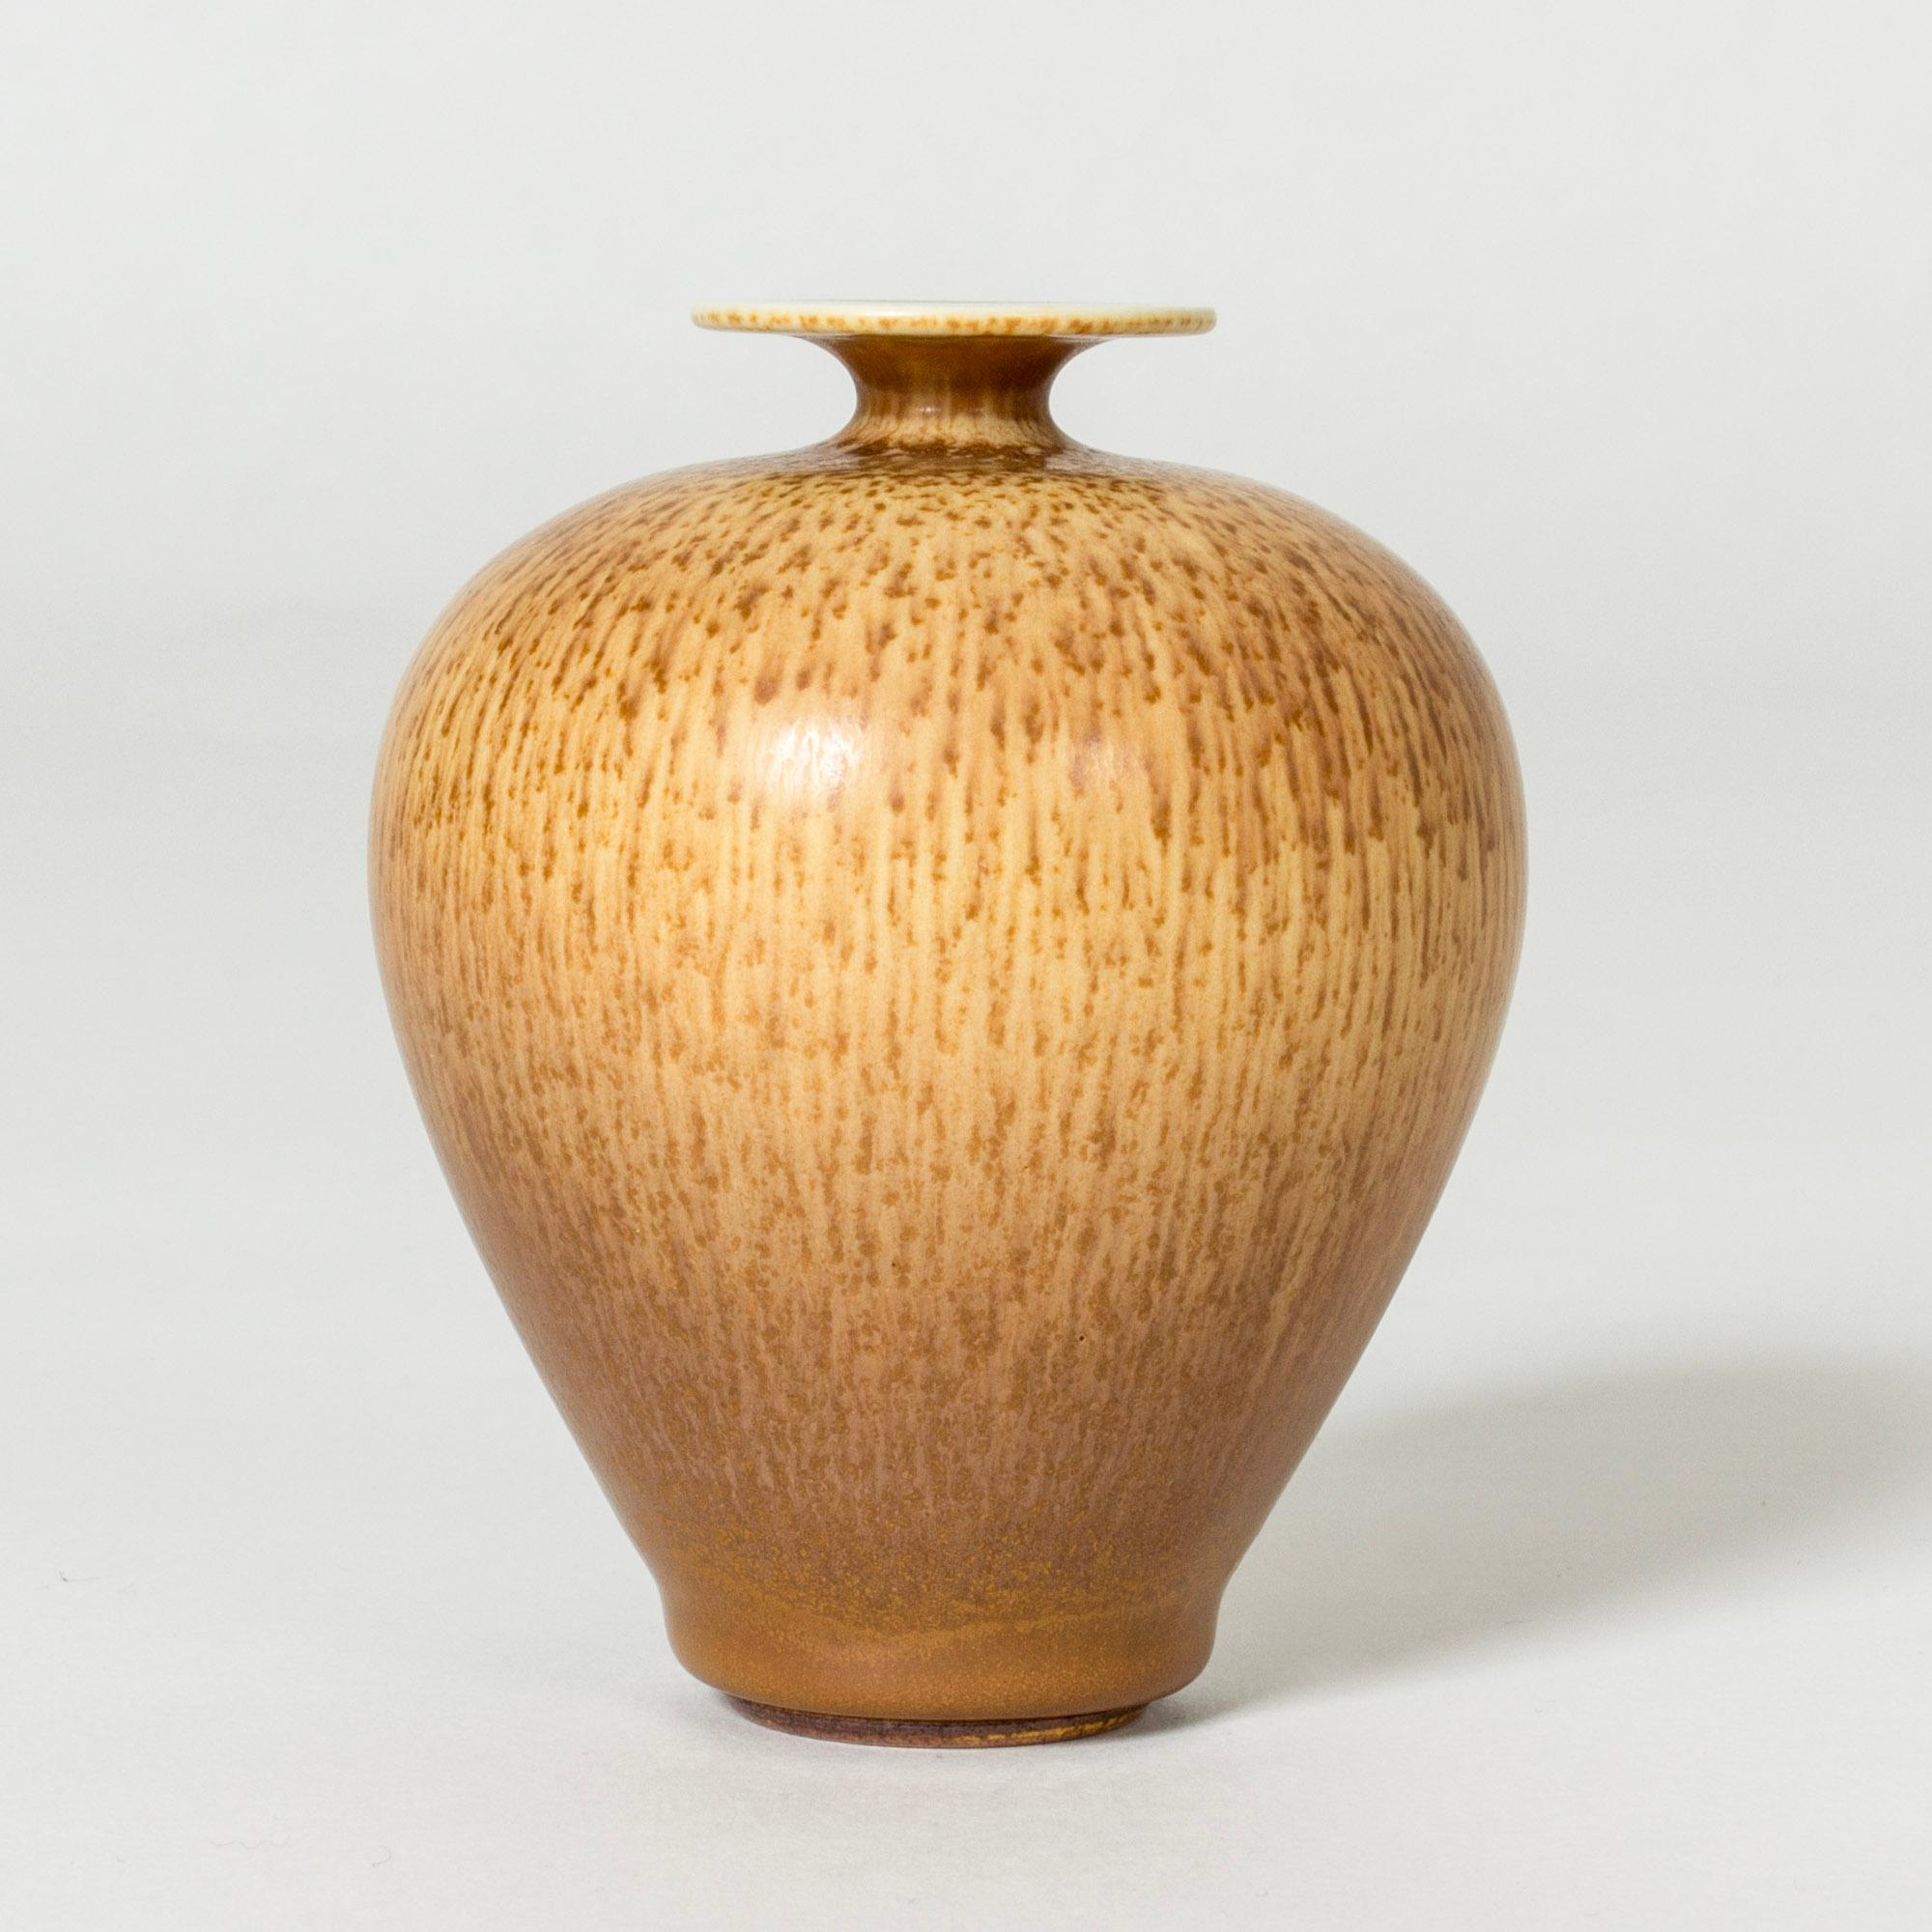 Beautiful, small stoneware vase by Berndt Friberg, in a plump form with distinct hare’s fur glaze in warm brown on caramel nuances.

Berndt Friberg was a Swedish ceramicist, renowned for his stoneware vases and vessels for Gustavsberg. His pure,